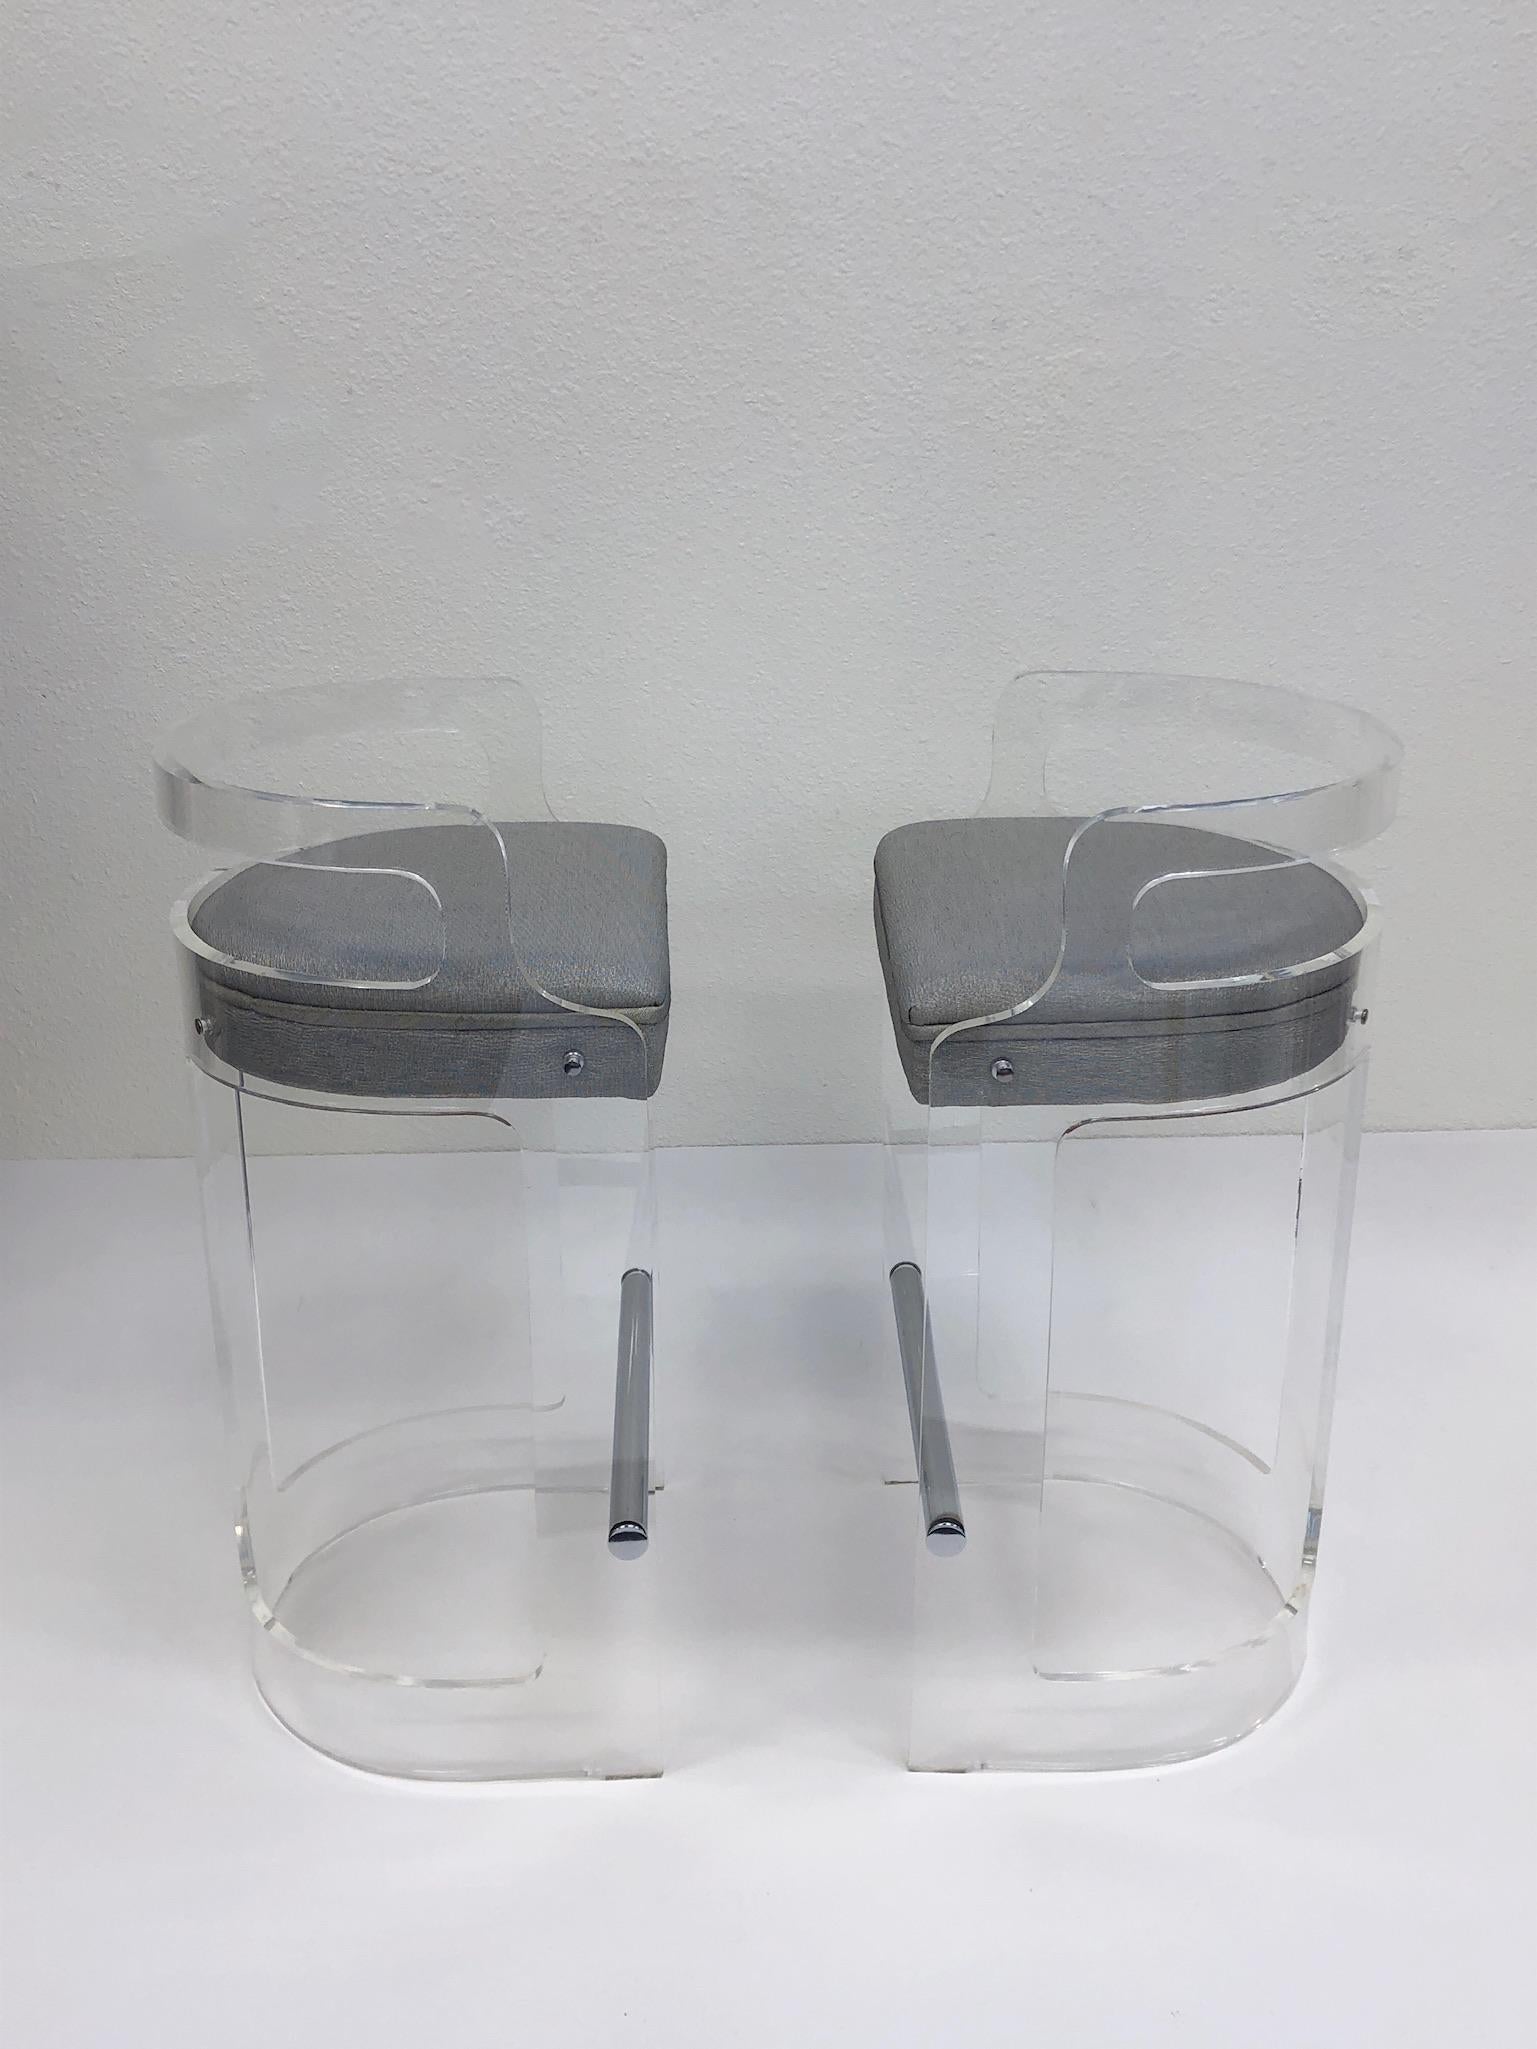 American Pair of Lucite and Chrome Barstools by Hill Manufacturing Co.